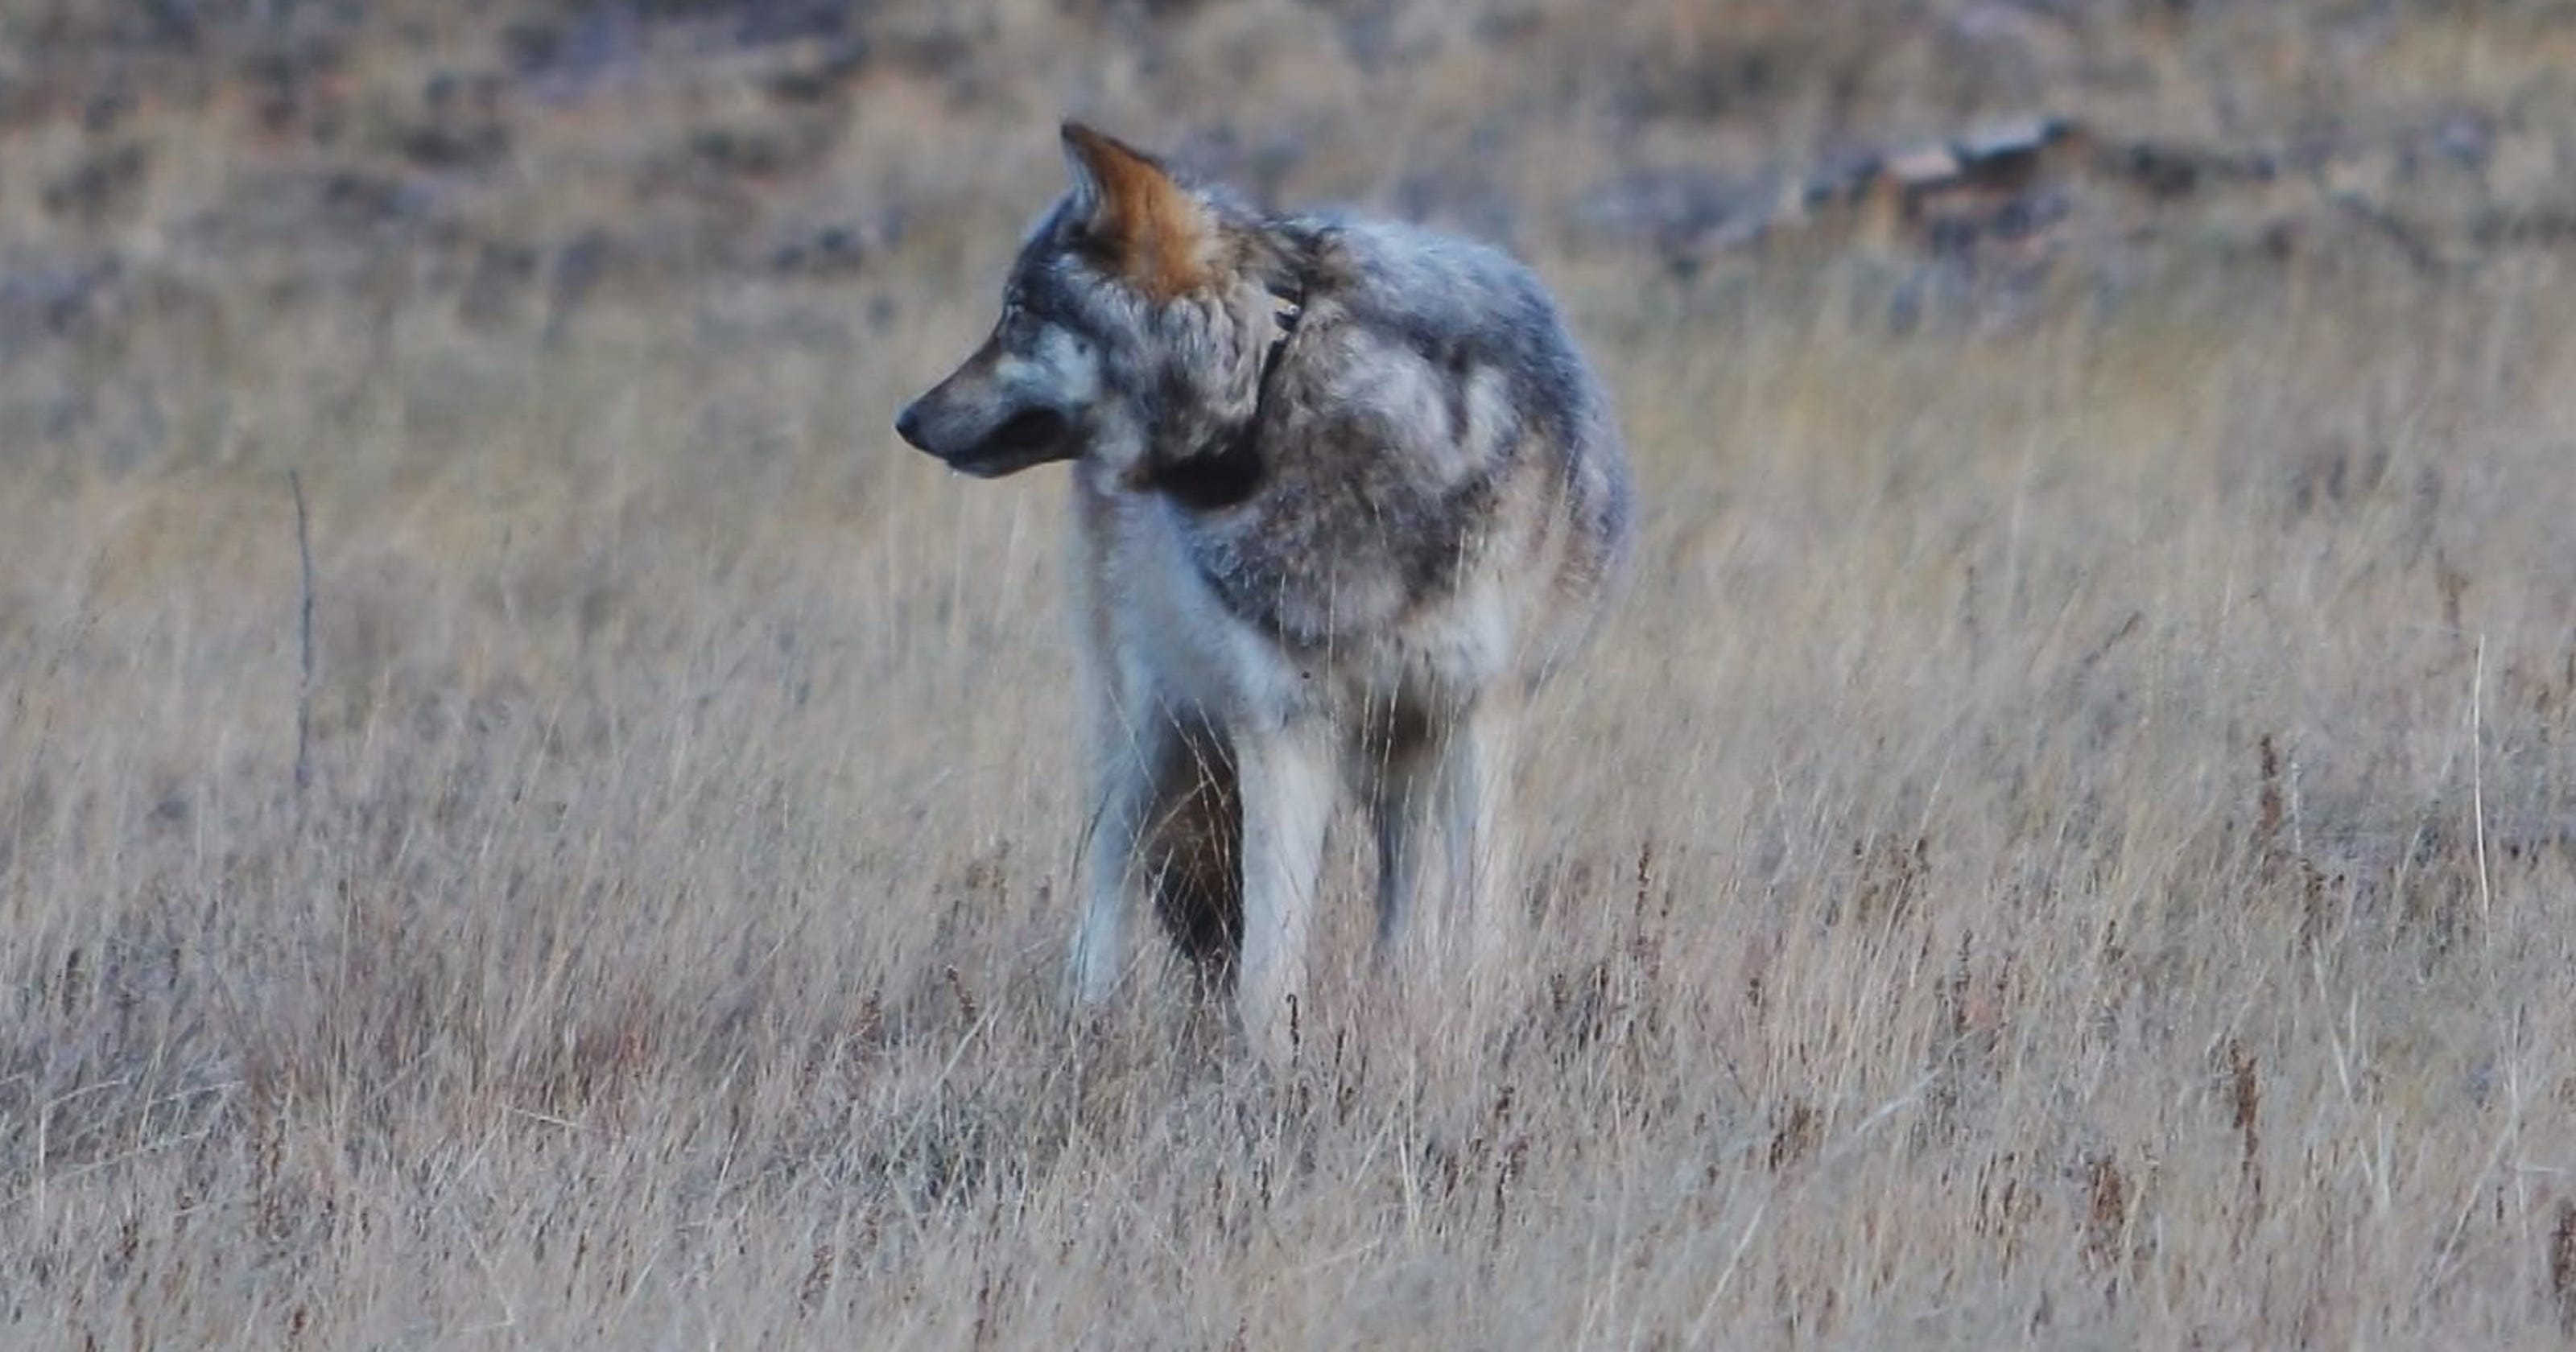 Endangered gray wolf confirmed to be at Grand Canyon